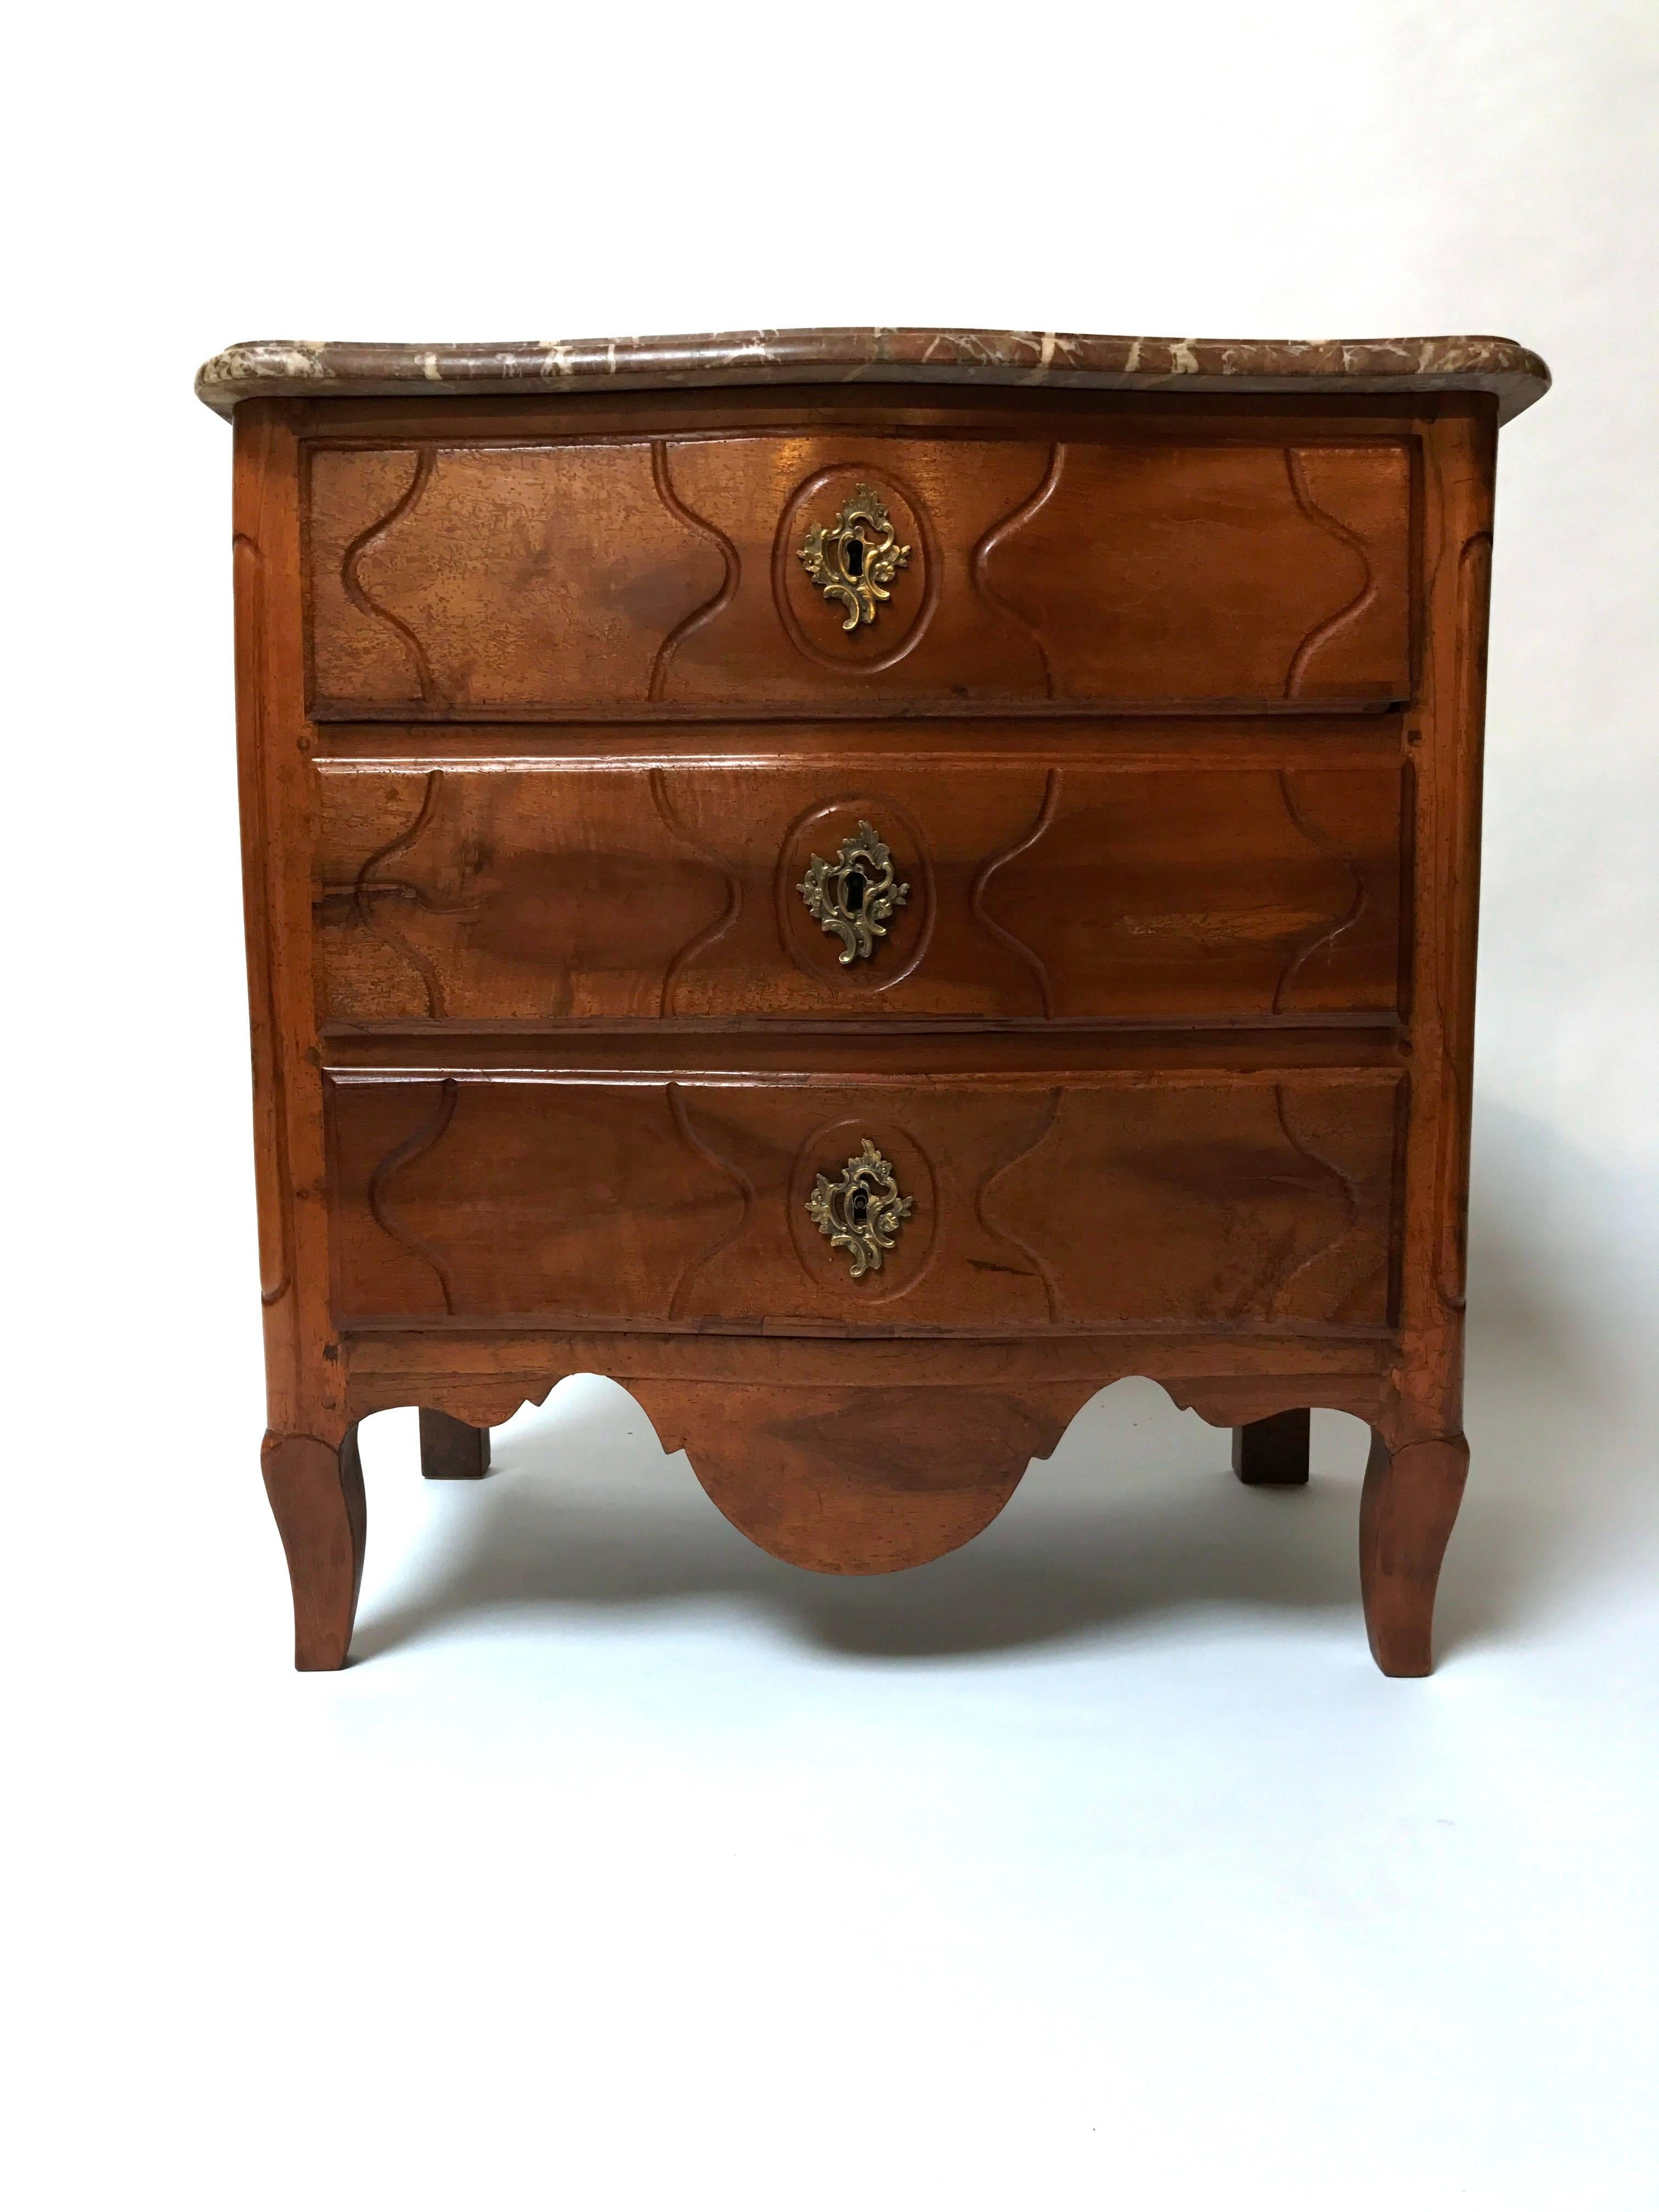 Period Louis XV French Petite Commode In Excellent Condition For Sale In Dallas, TX